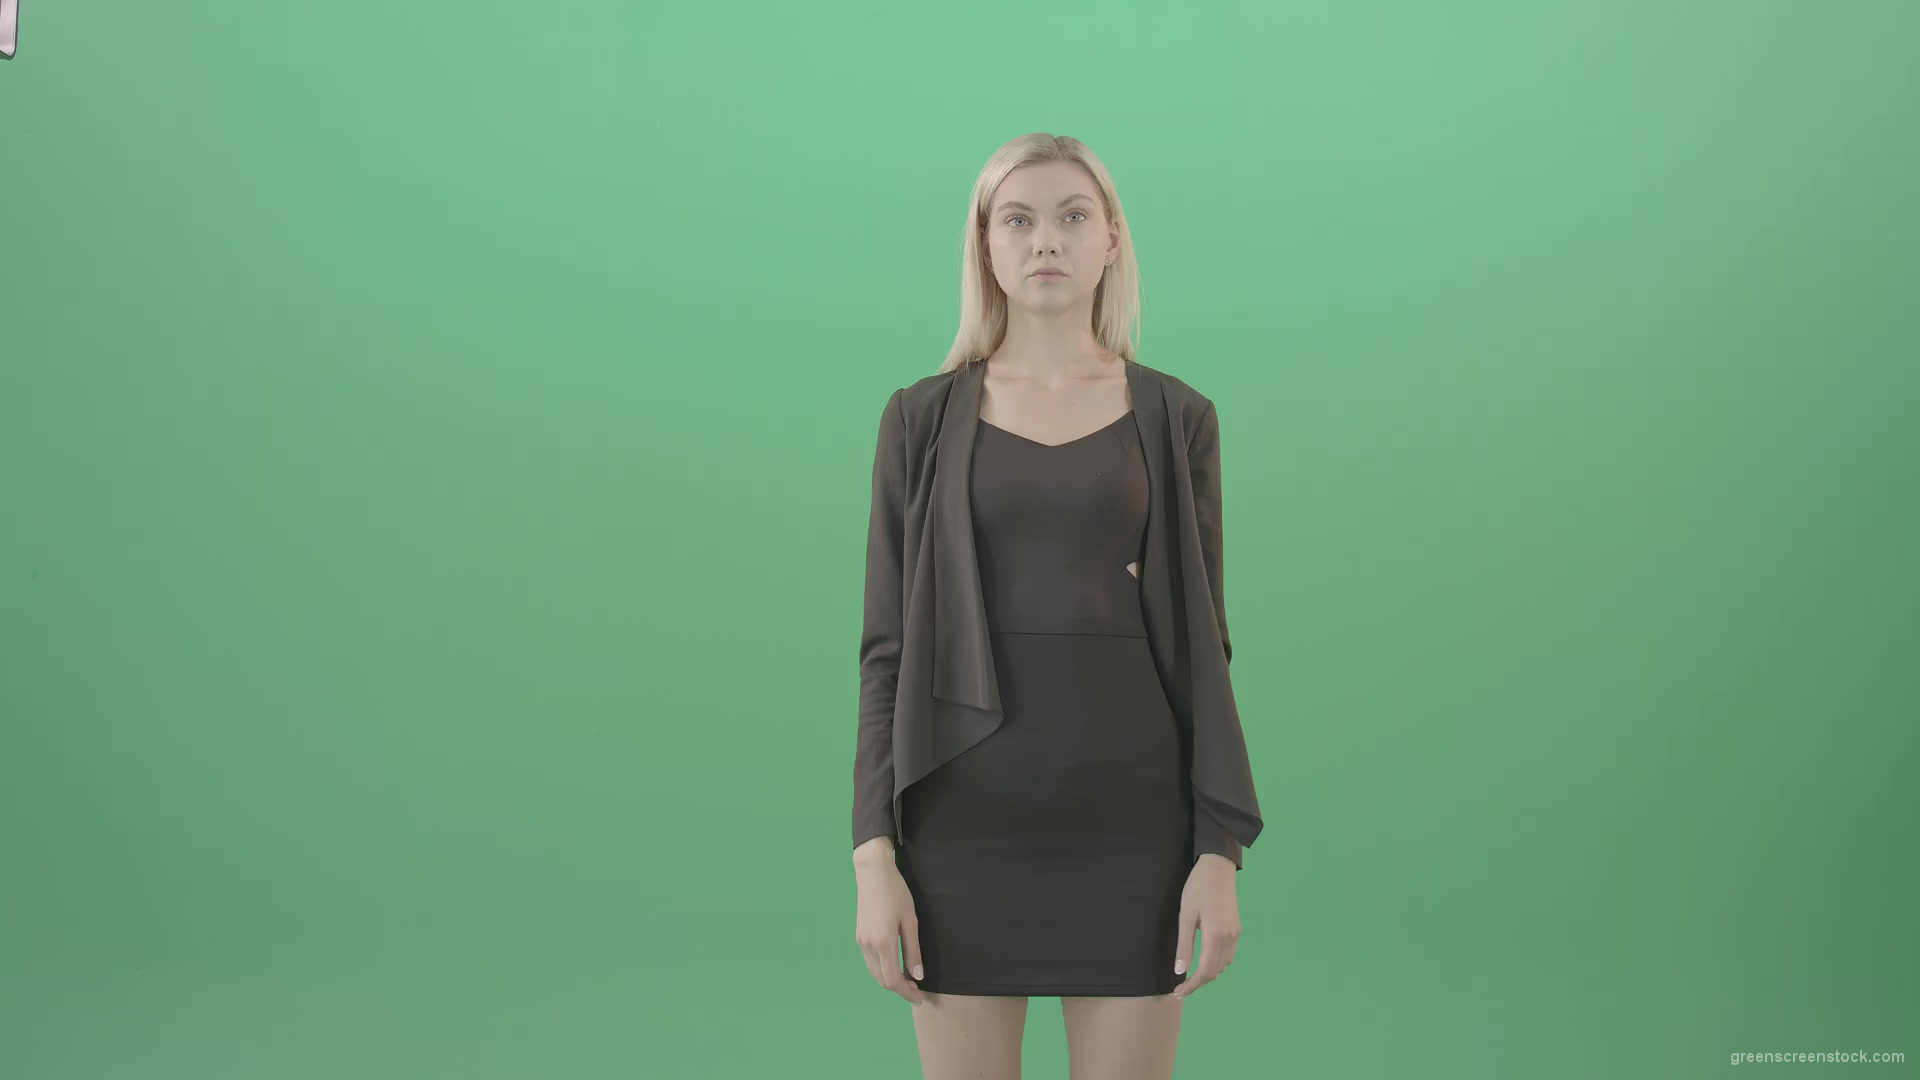 Girl-searching-in-internet-virtual-shopping-on-touch-screen-on-green-background-4K-Video-Footage-1920_001 Green Screen Stock